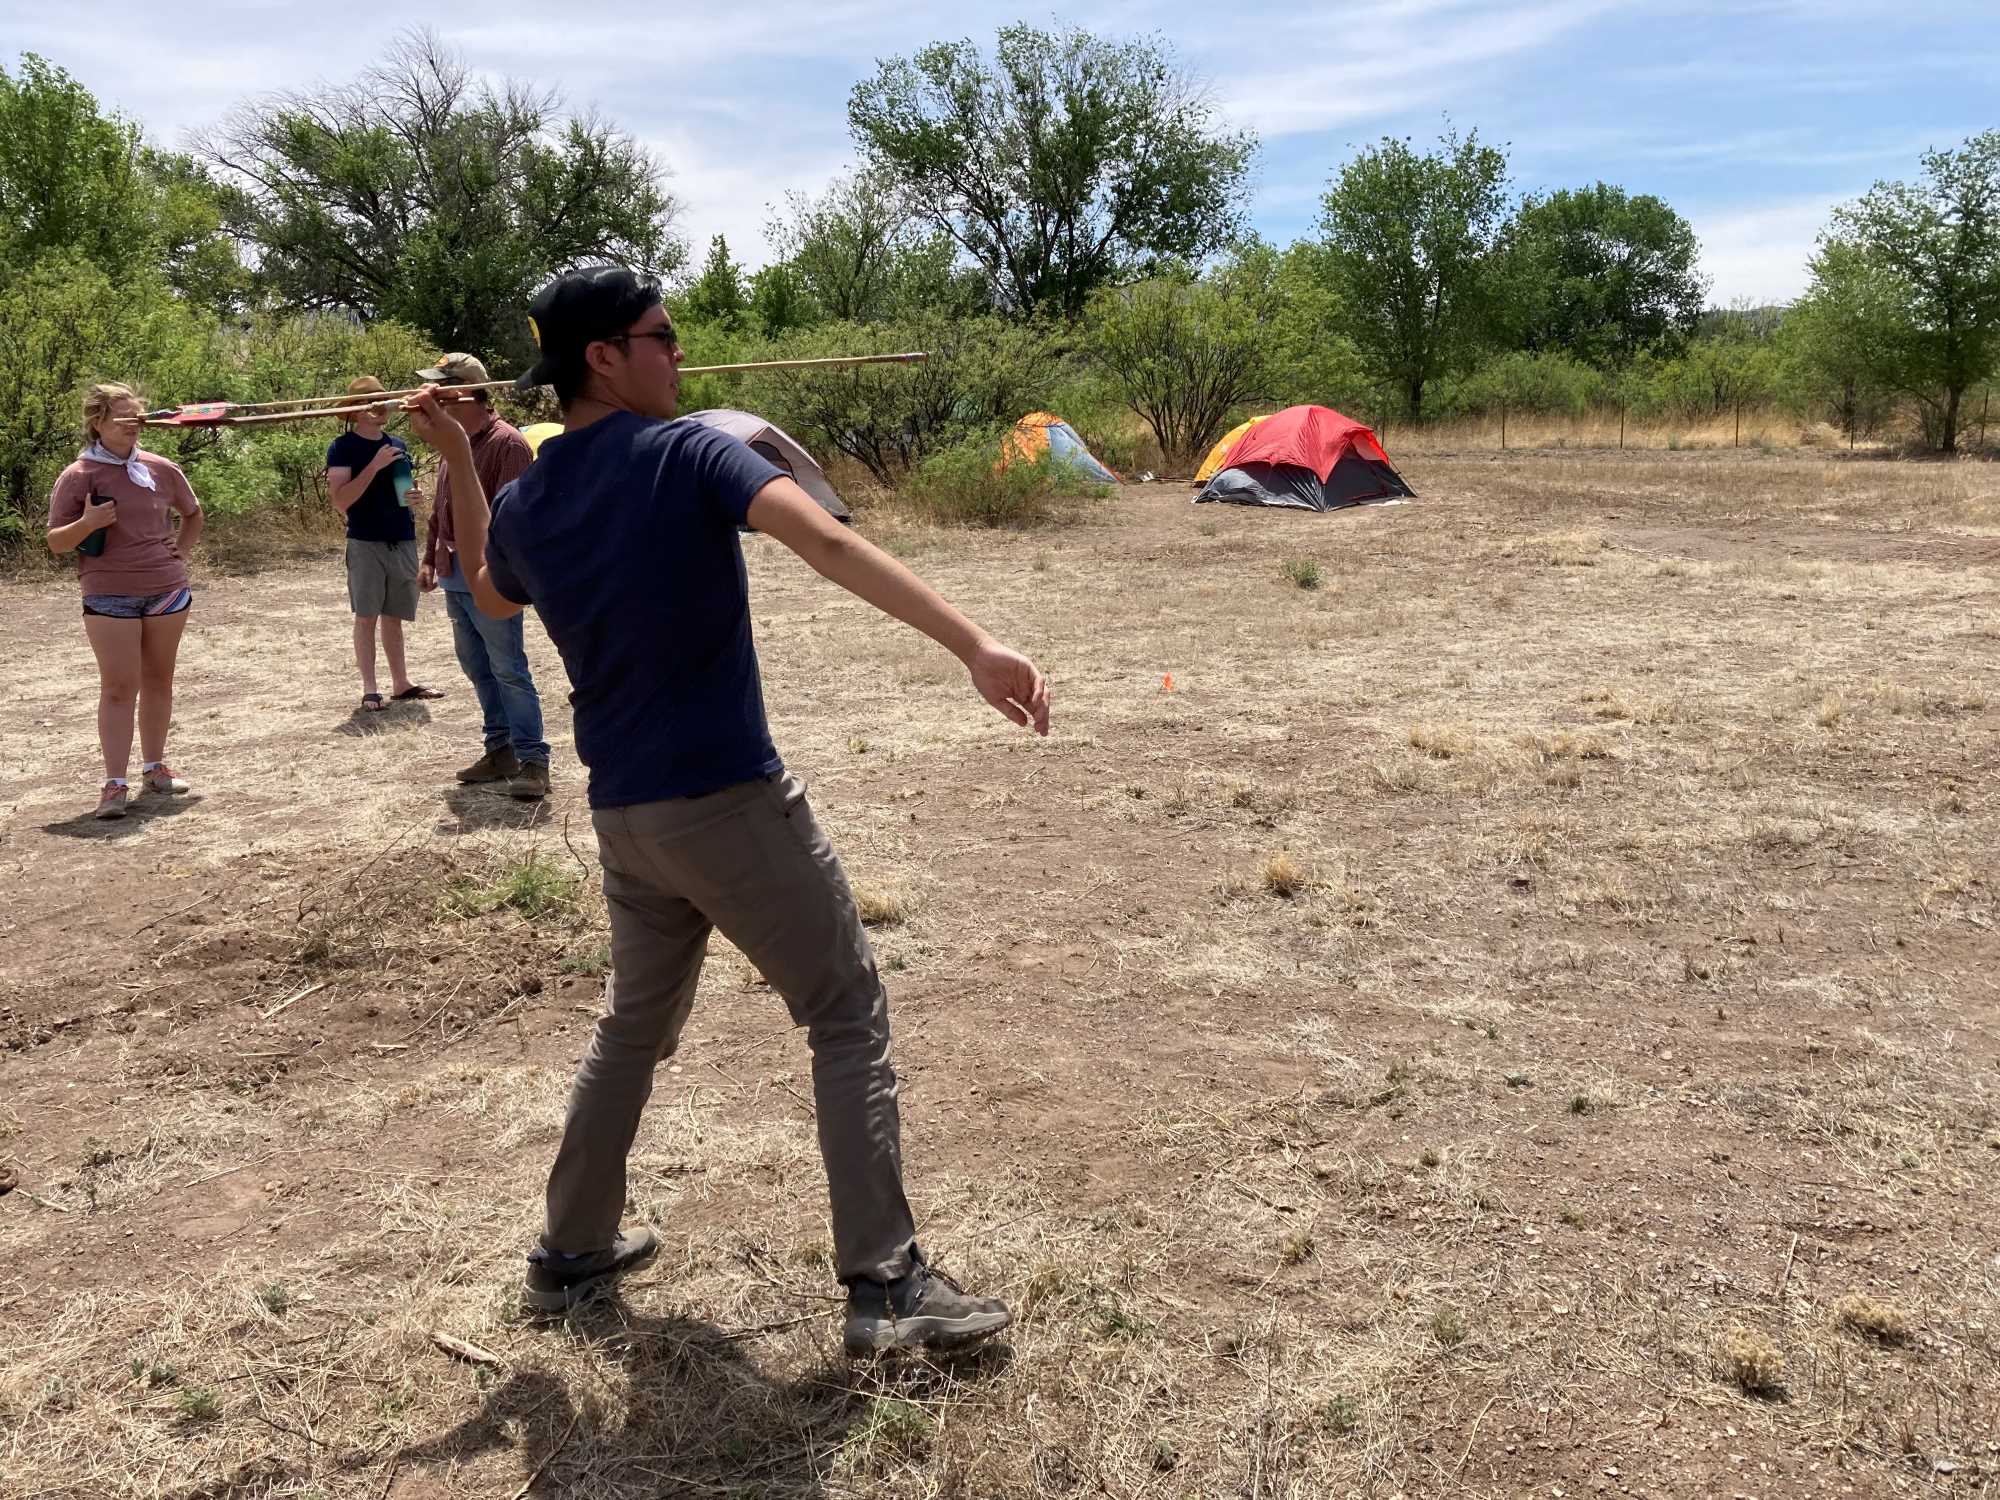 University of Arizona undergraduate Totsoni Willeto tries out the atlatl on our first evening in camp in Cliff, NM.